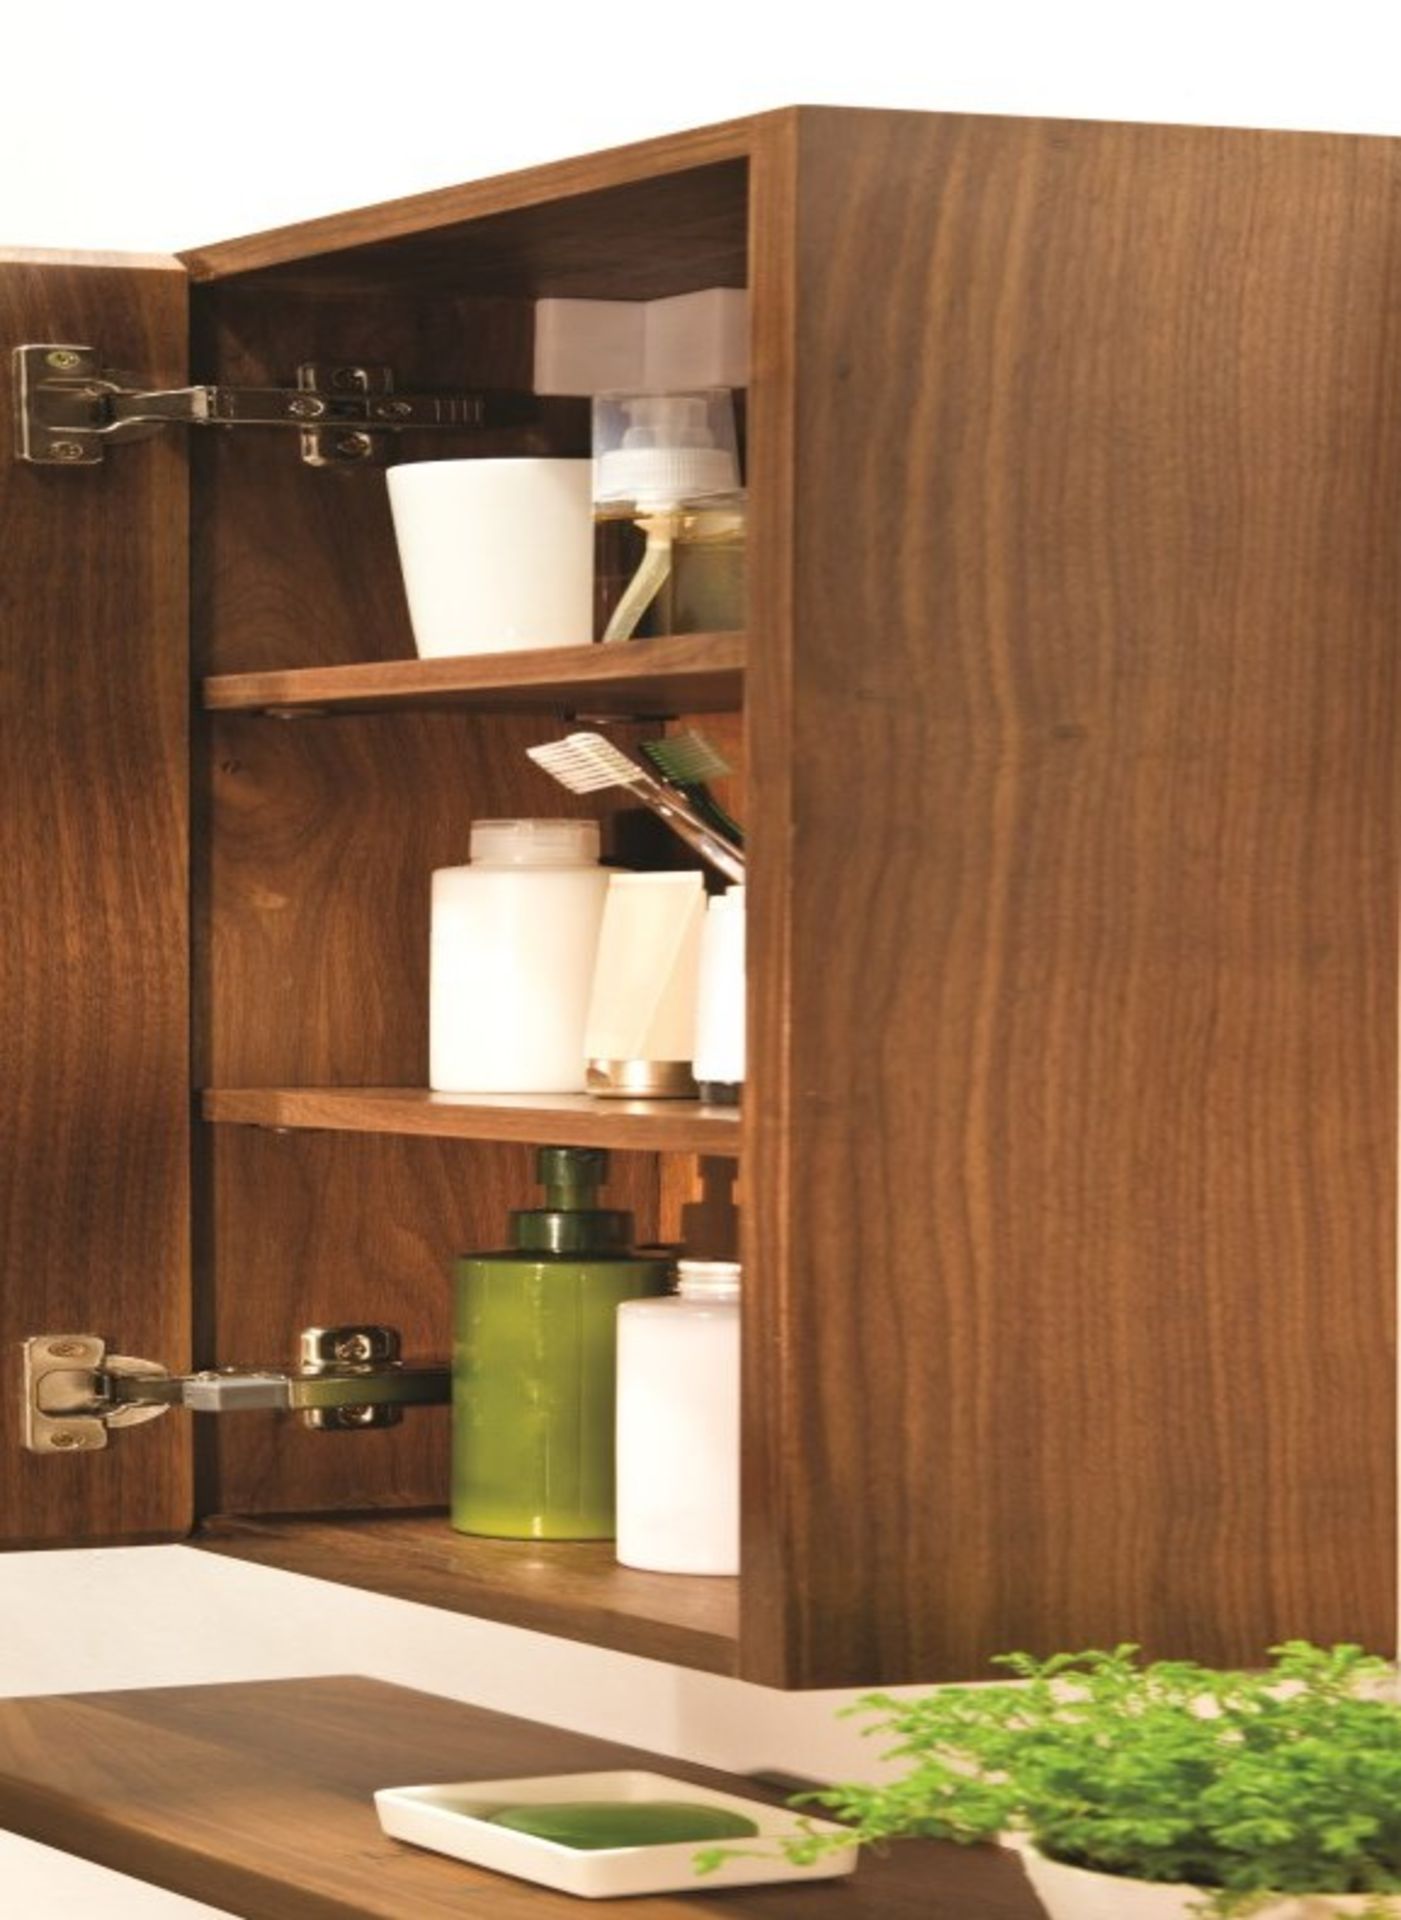 1 x Stonearth 600mm Wall Mounted Mirrored Bathroom Storage Cabinet - American Solid Walnut RRP £460 - Image 10 of 13